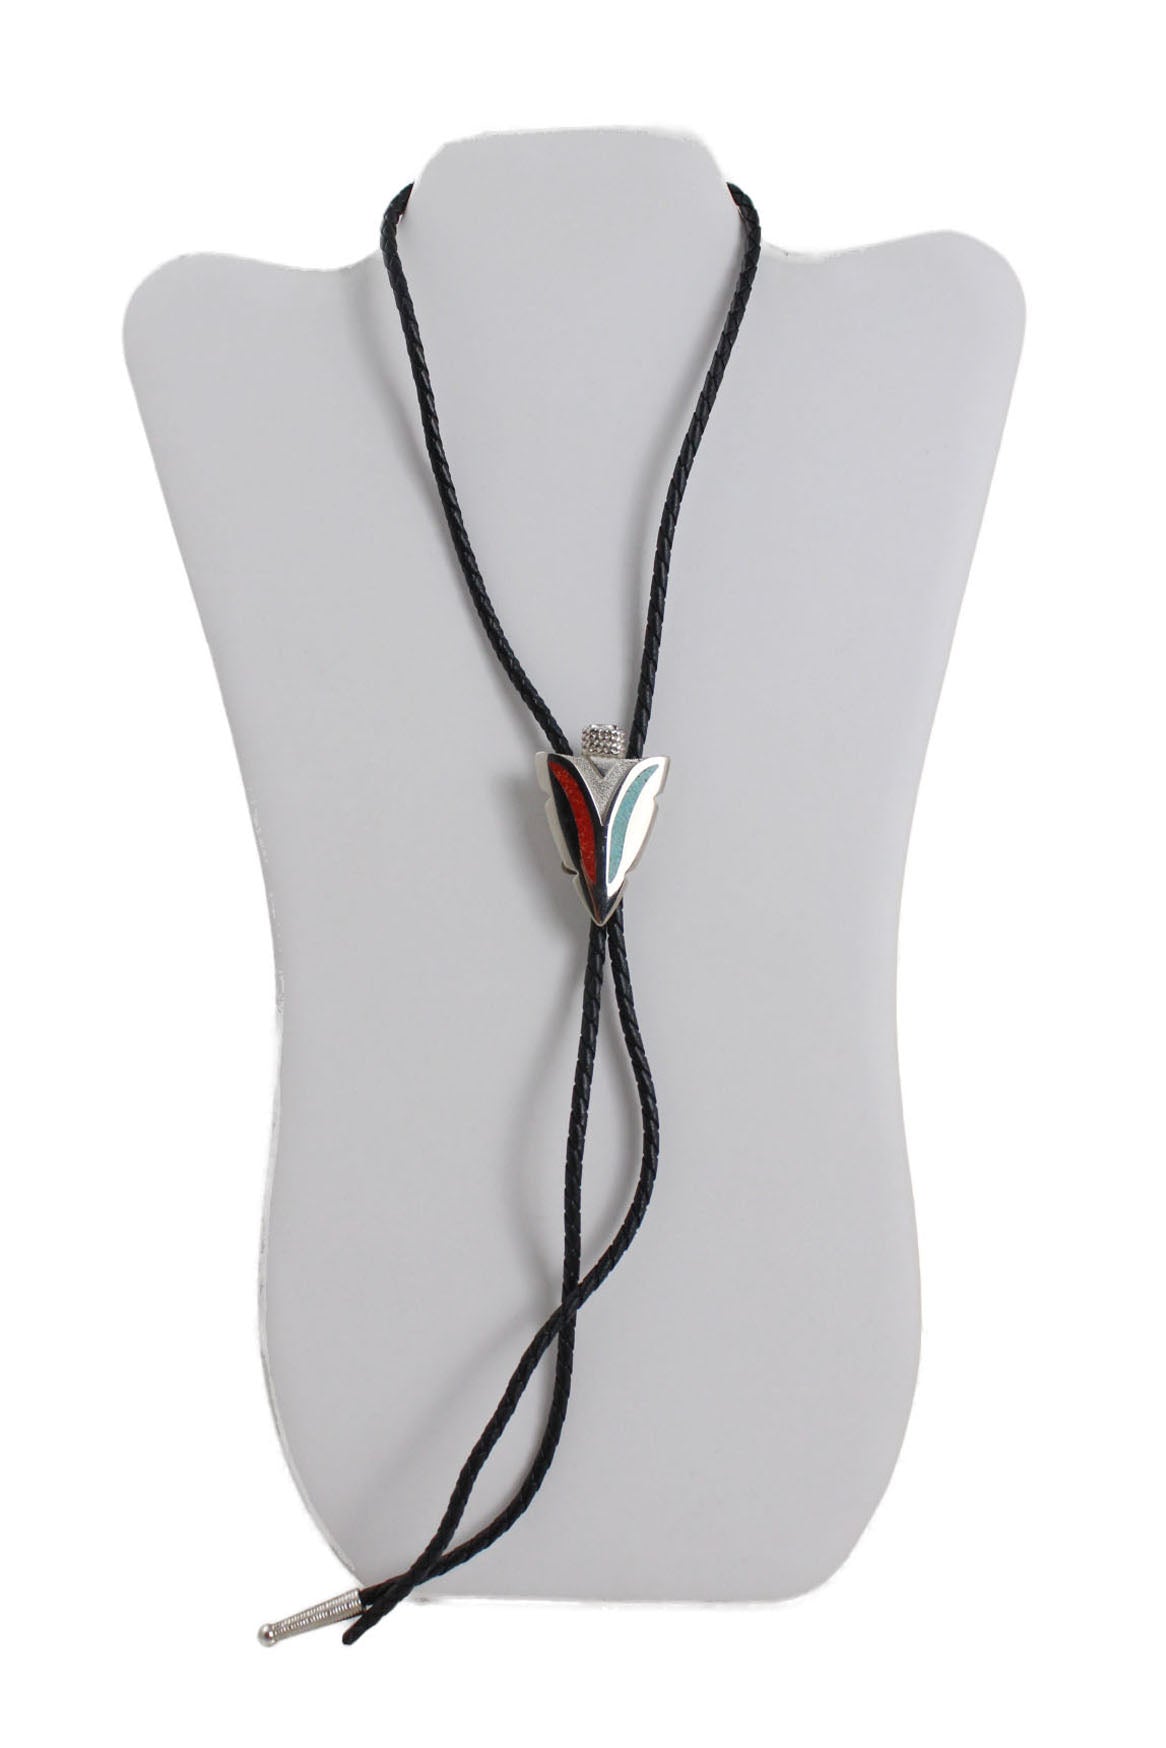 black braided leather-look bolo tie with a silver toned metallic arrowhead centerpiece adorned with turquoise and red stones staged on neck form. 